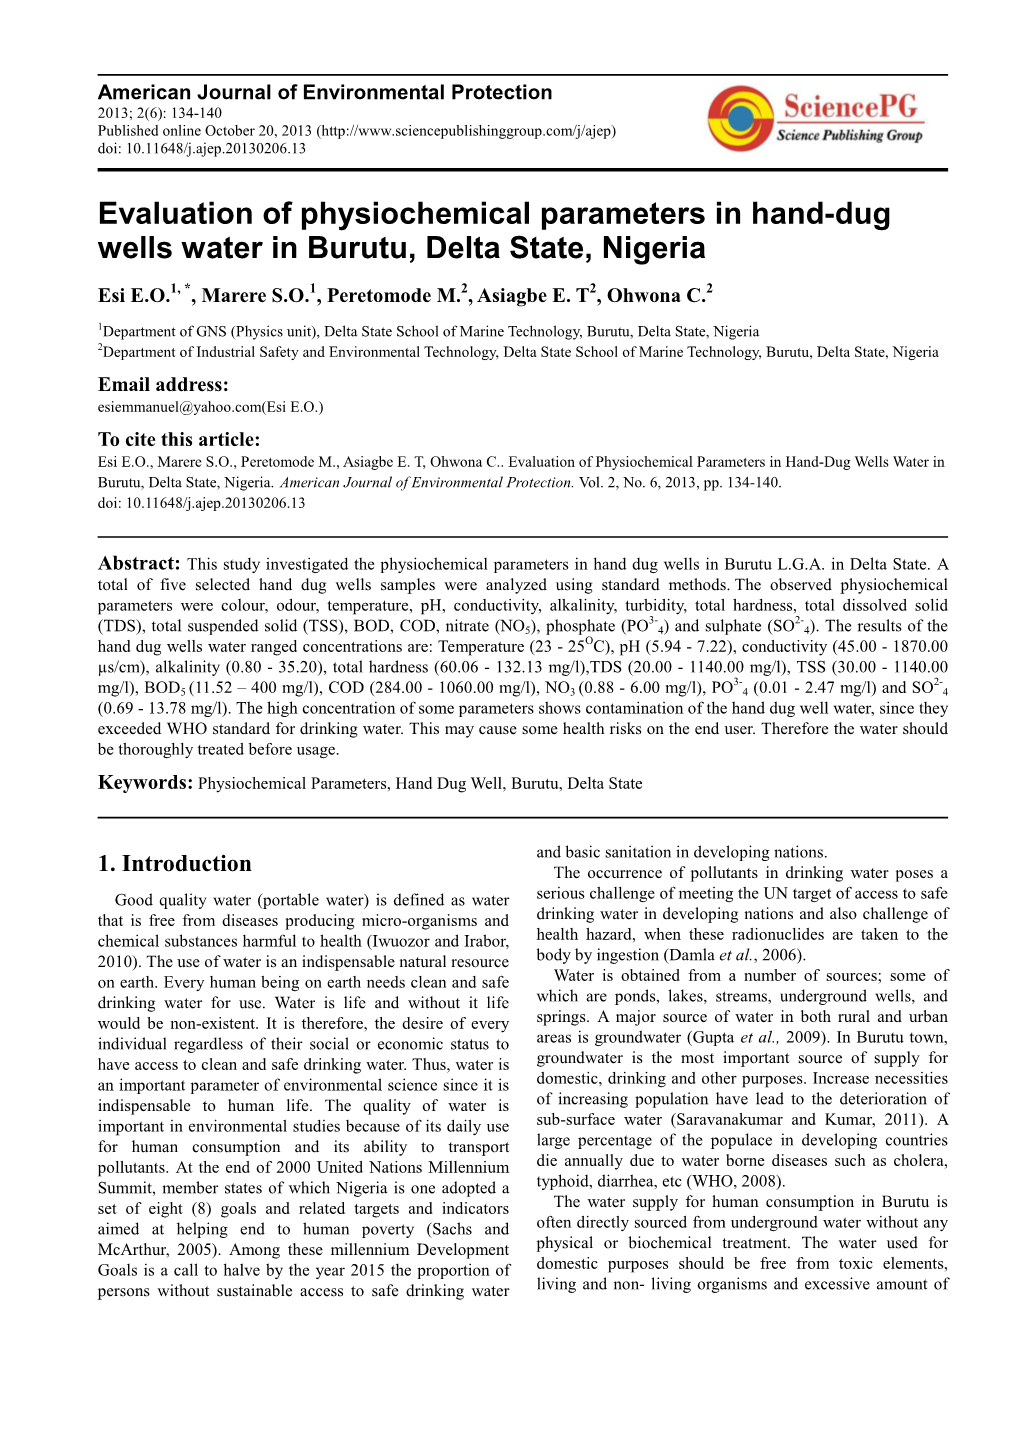 Evaluation of Physiochemical Parameters in Hand-Dug Wells Water in Burutu, Delta State, Nigeria